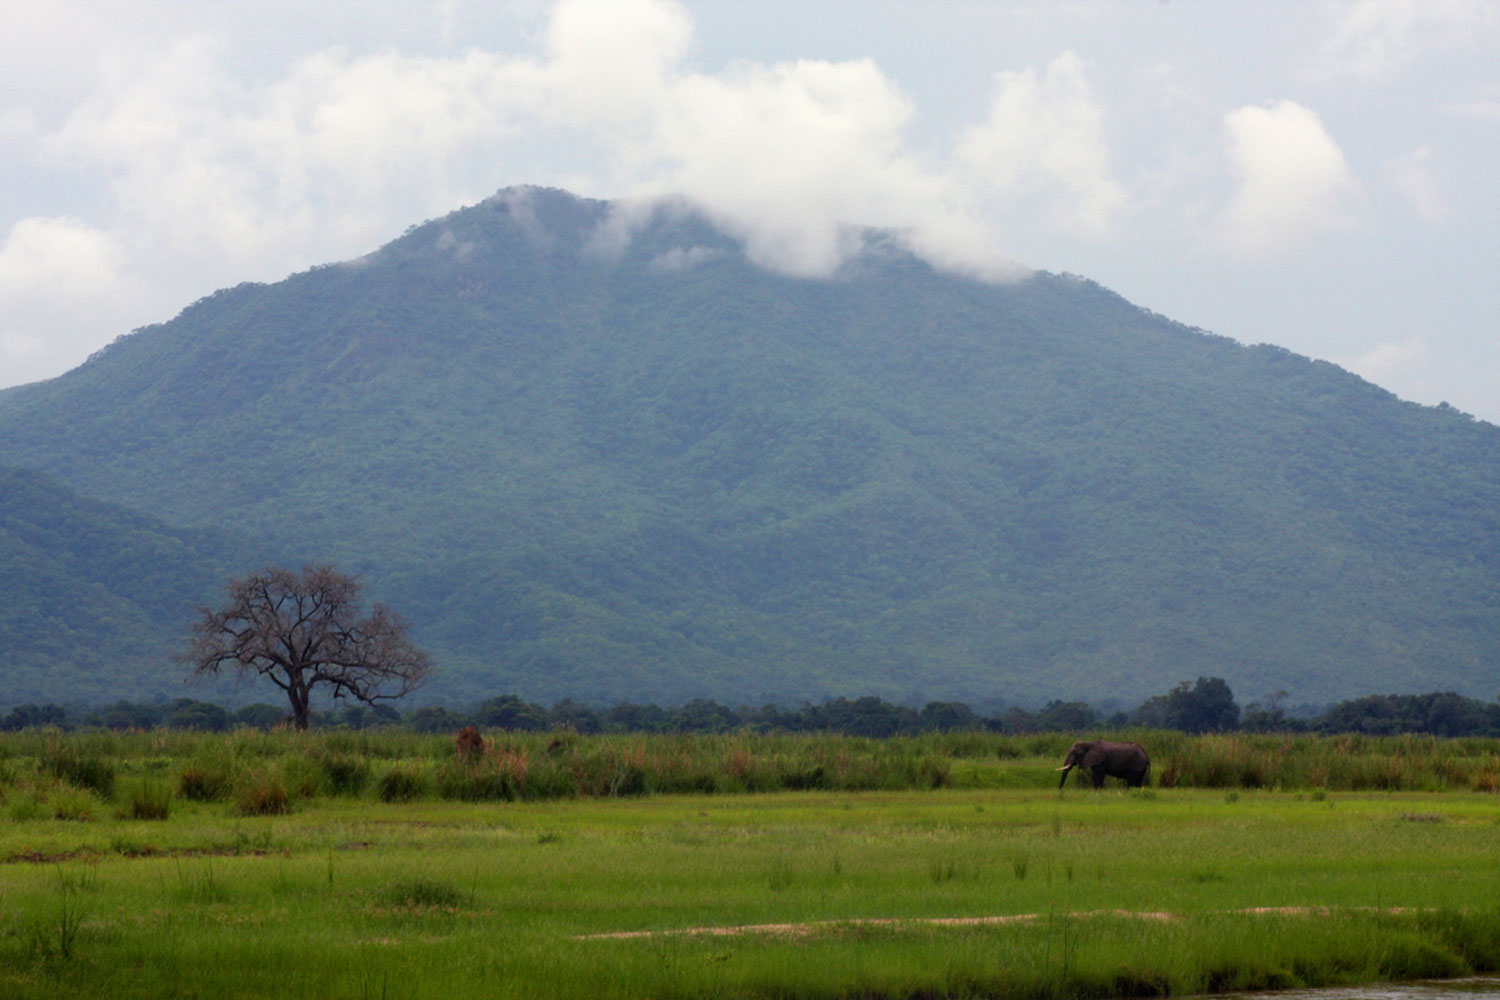 One of the many grassy islands with the Zambian escarpment in the background